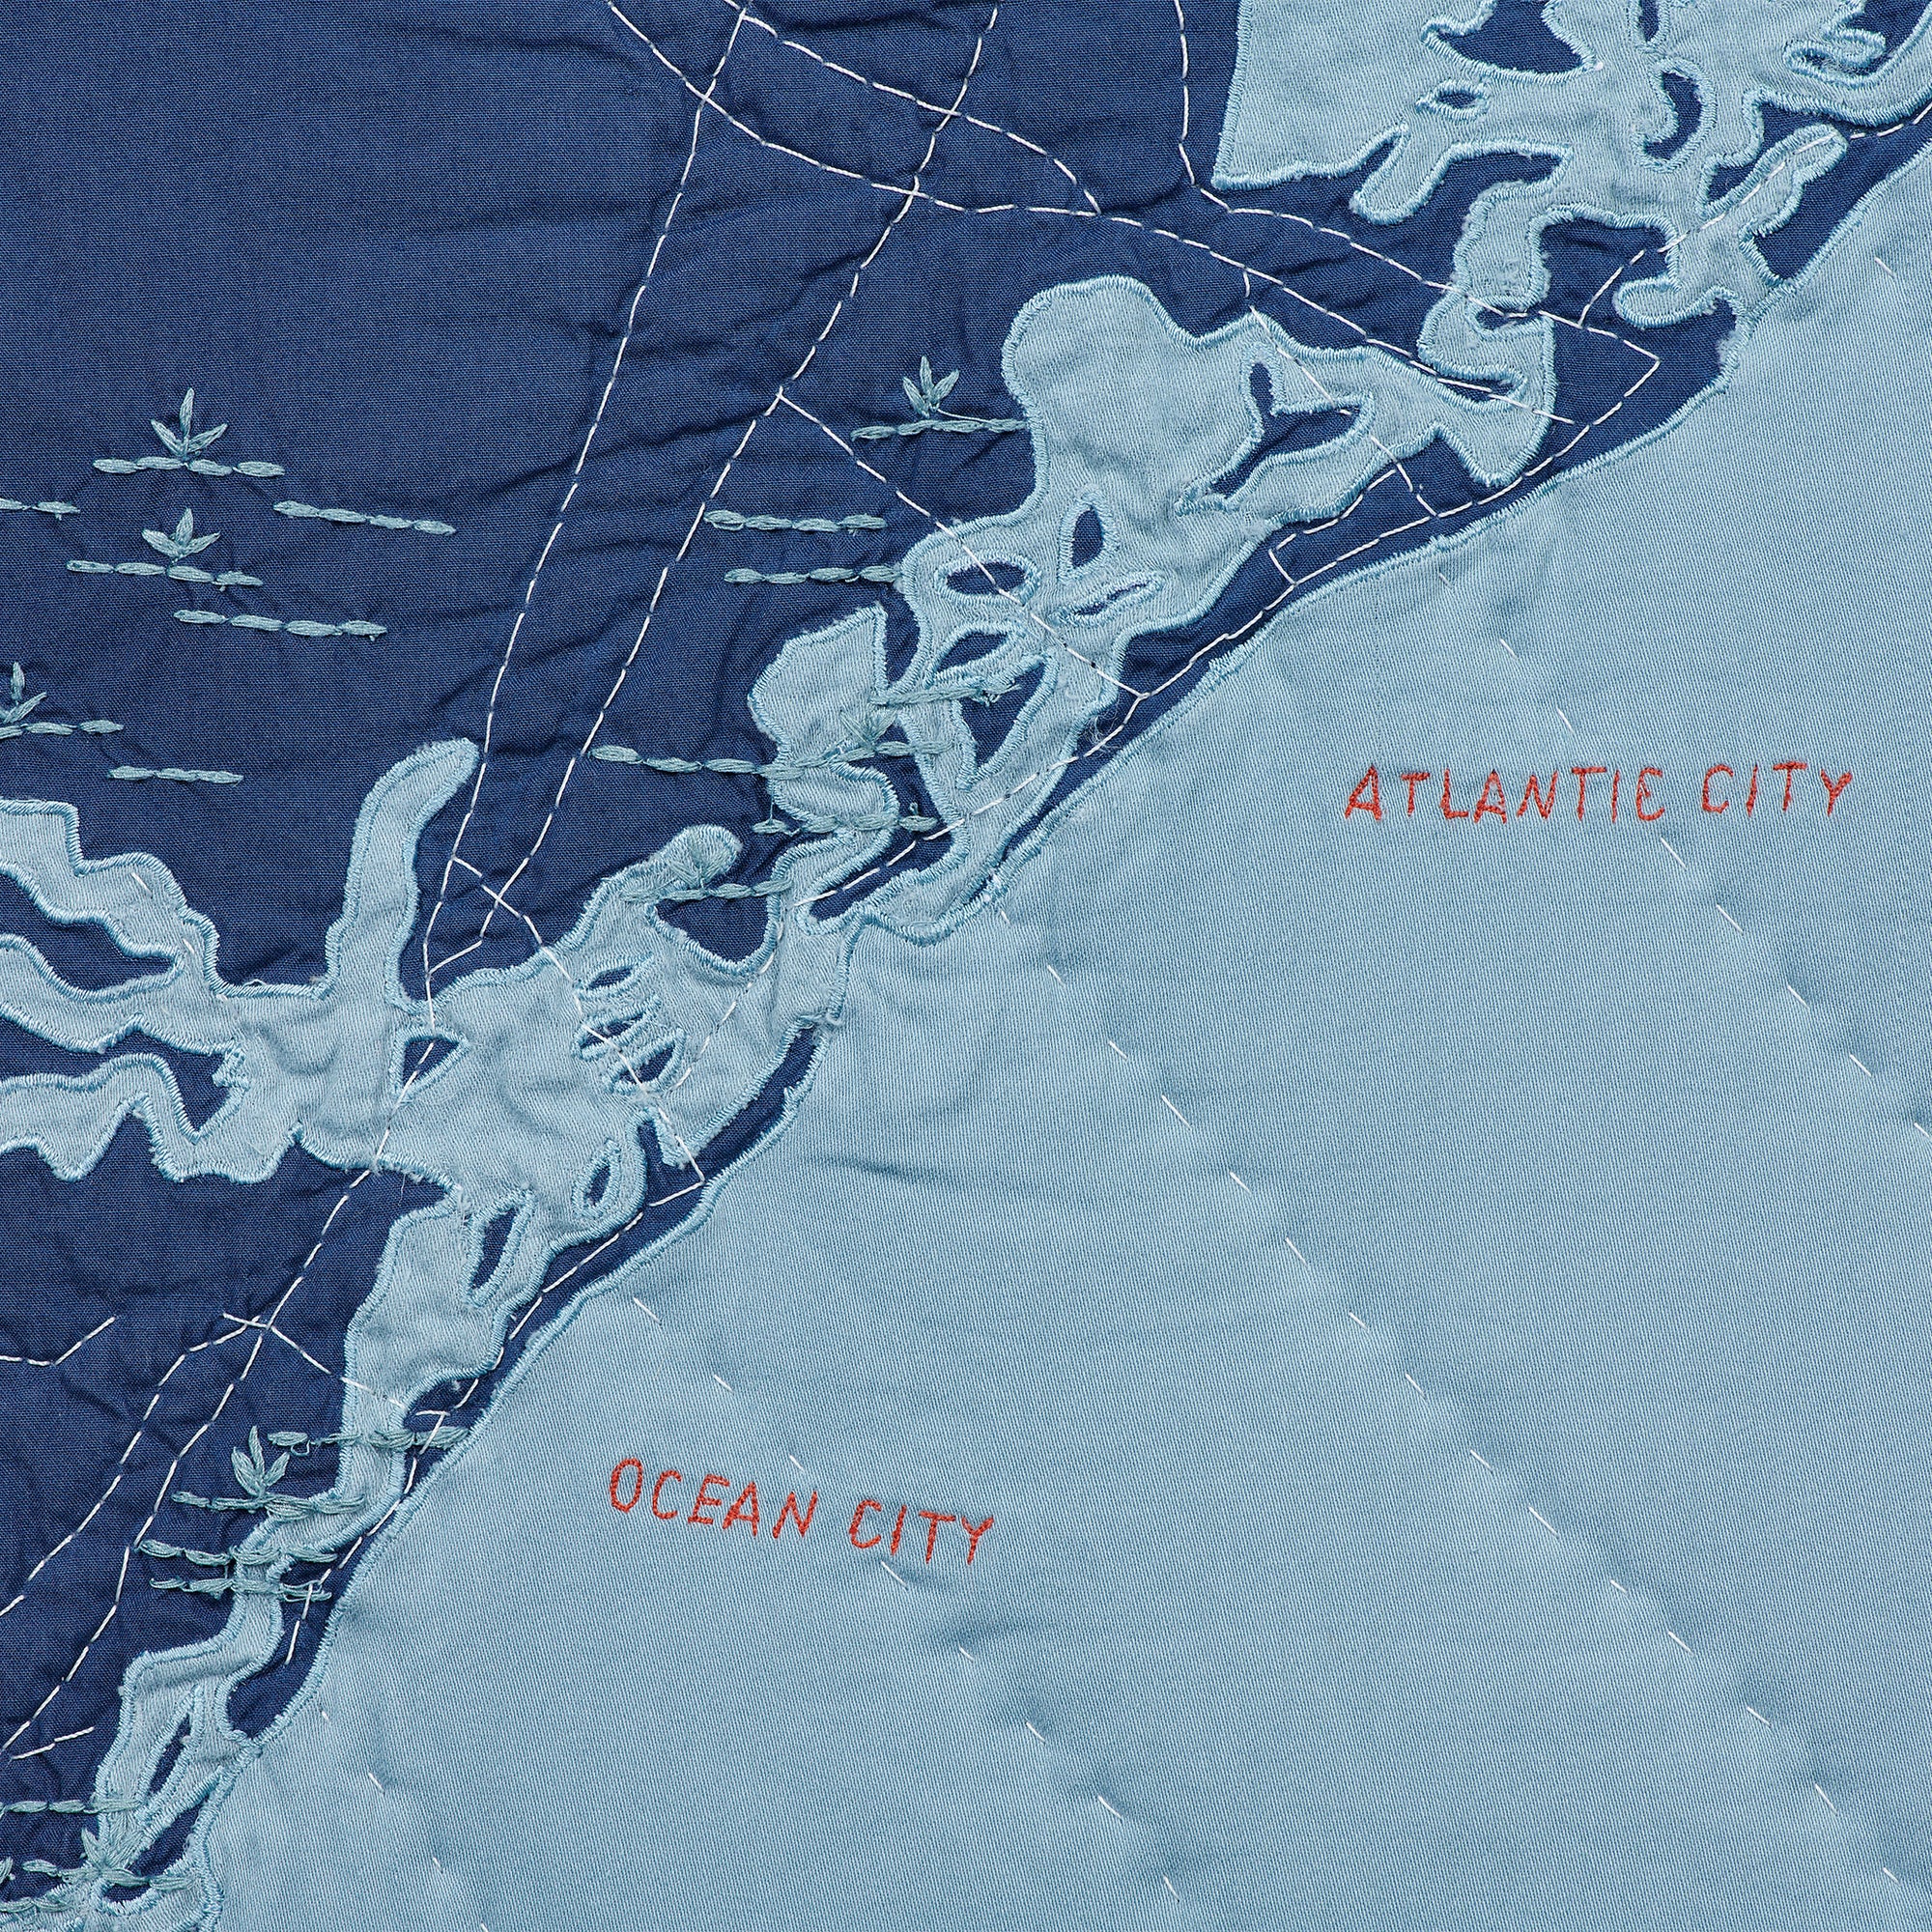 Detail shot of Atlantic City and Ocean City on the Jersey Shore Coastal Quilt in Navy and Steel blue.